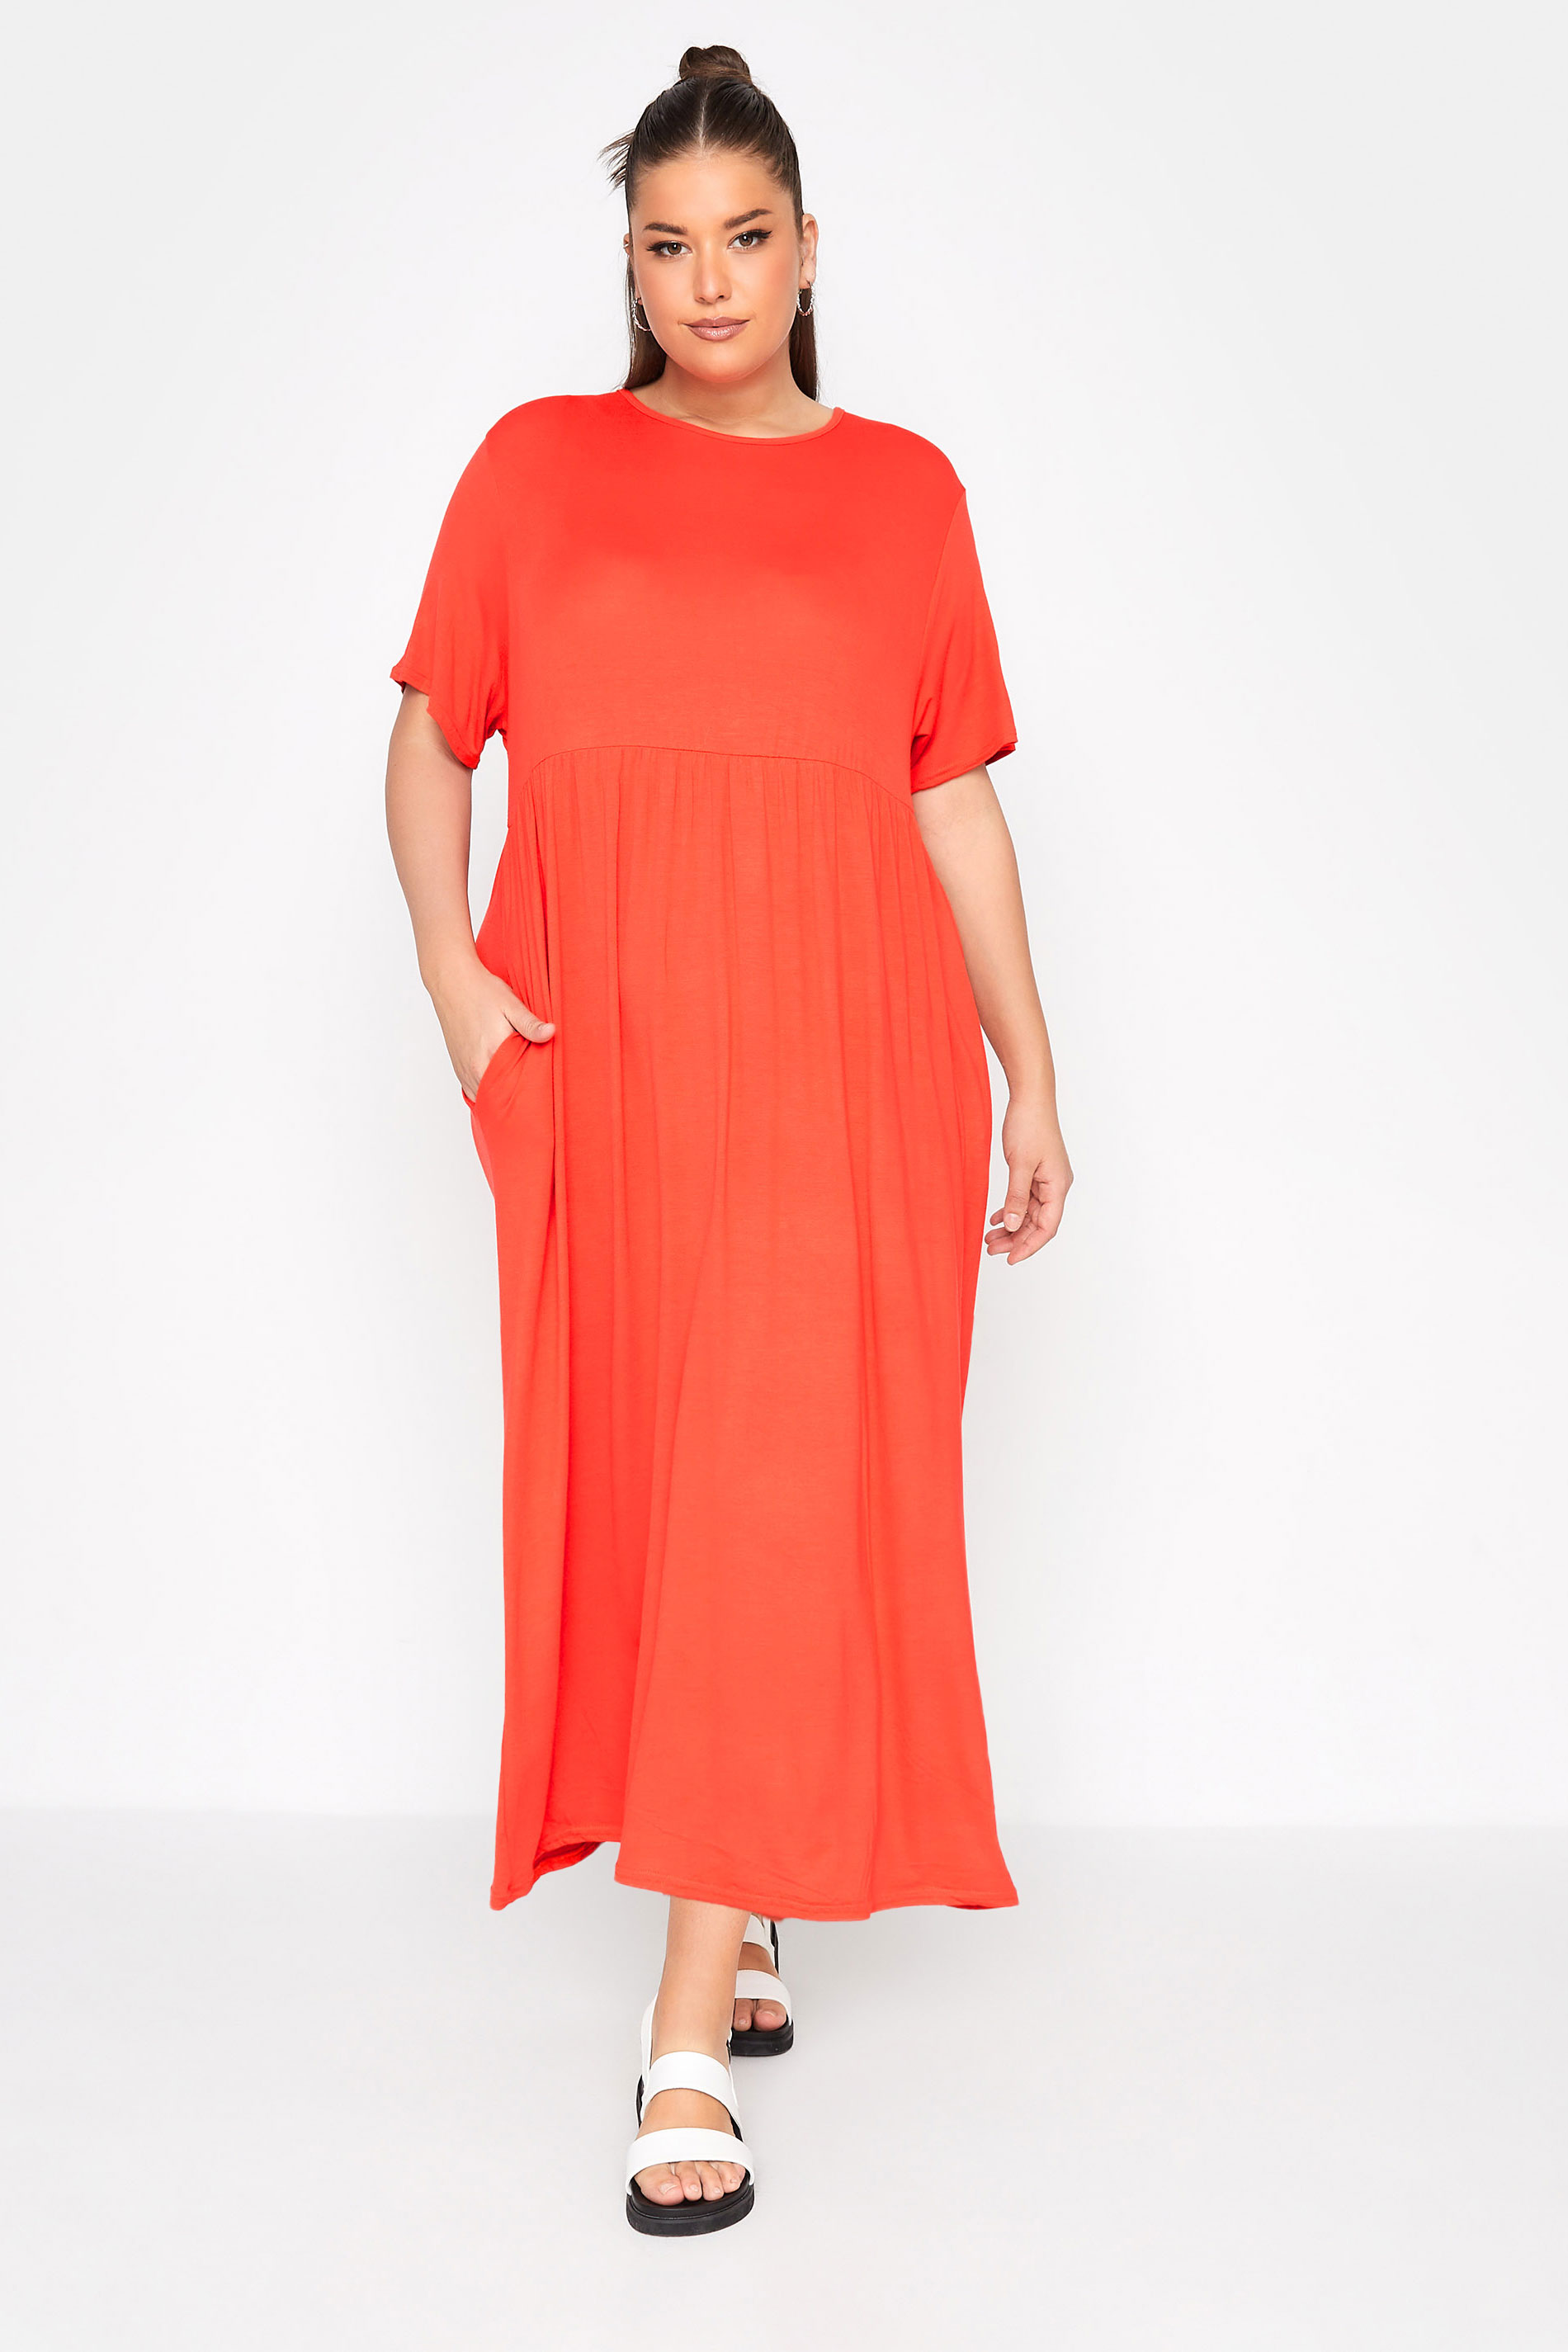 LIMITED COLLECTION Plus Size Orange Throw On Maxi Dress | Yours Clothing 1